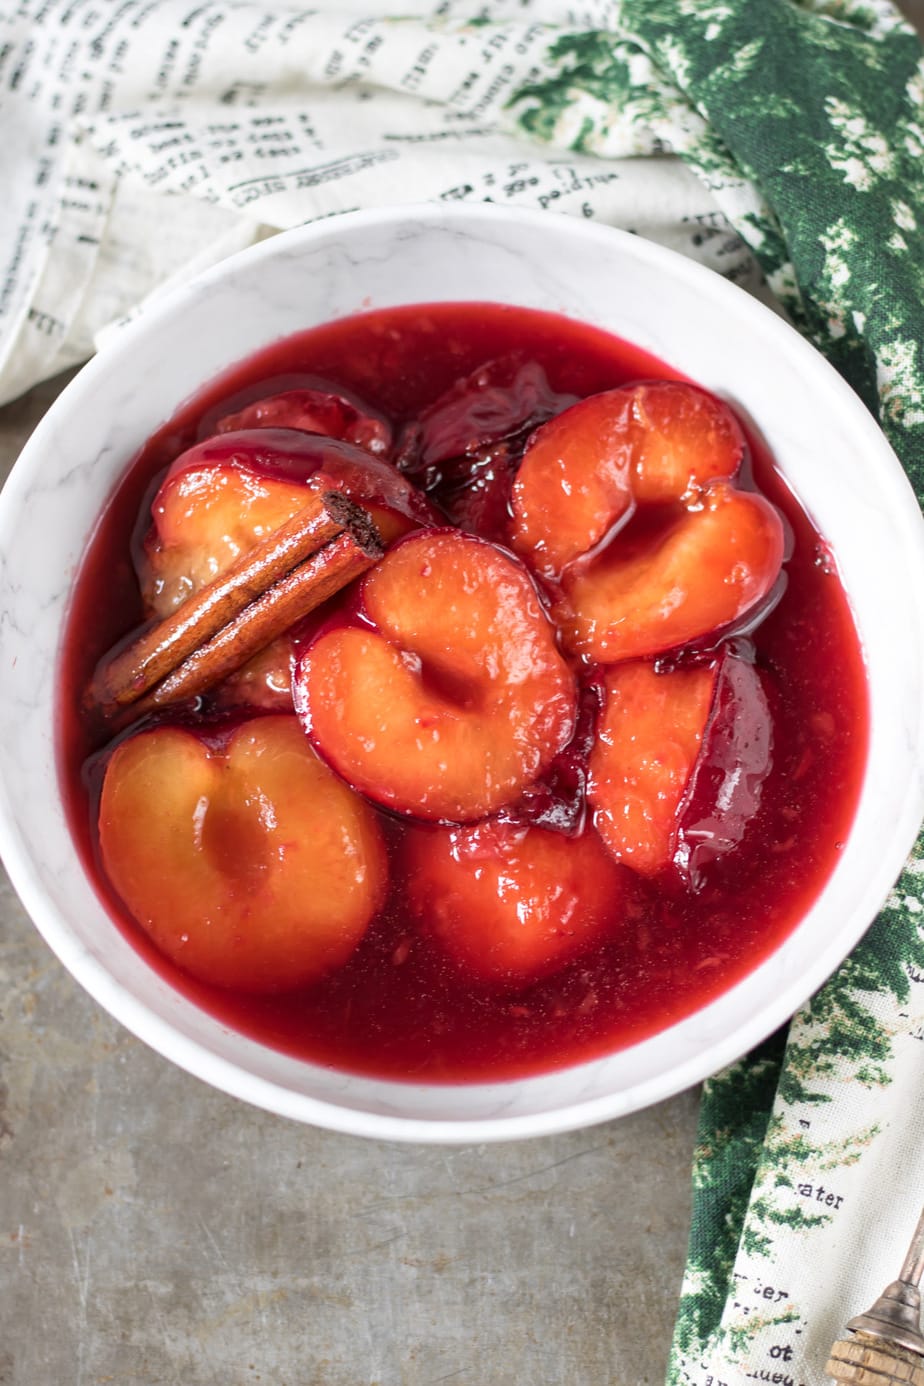 A bowl of ripe plums and a cinnamon stick.